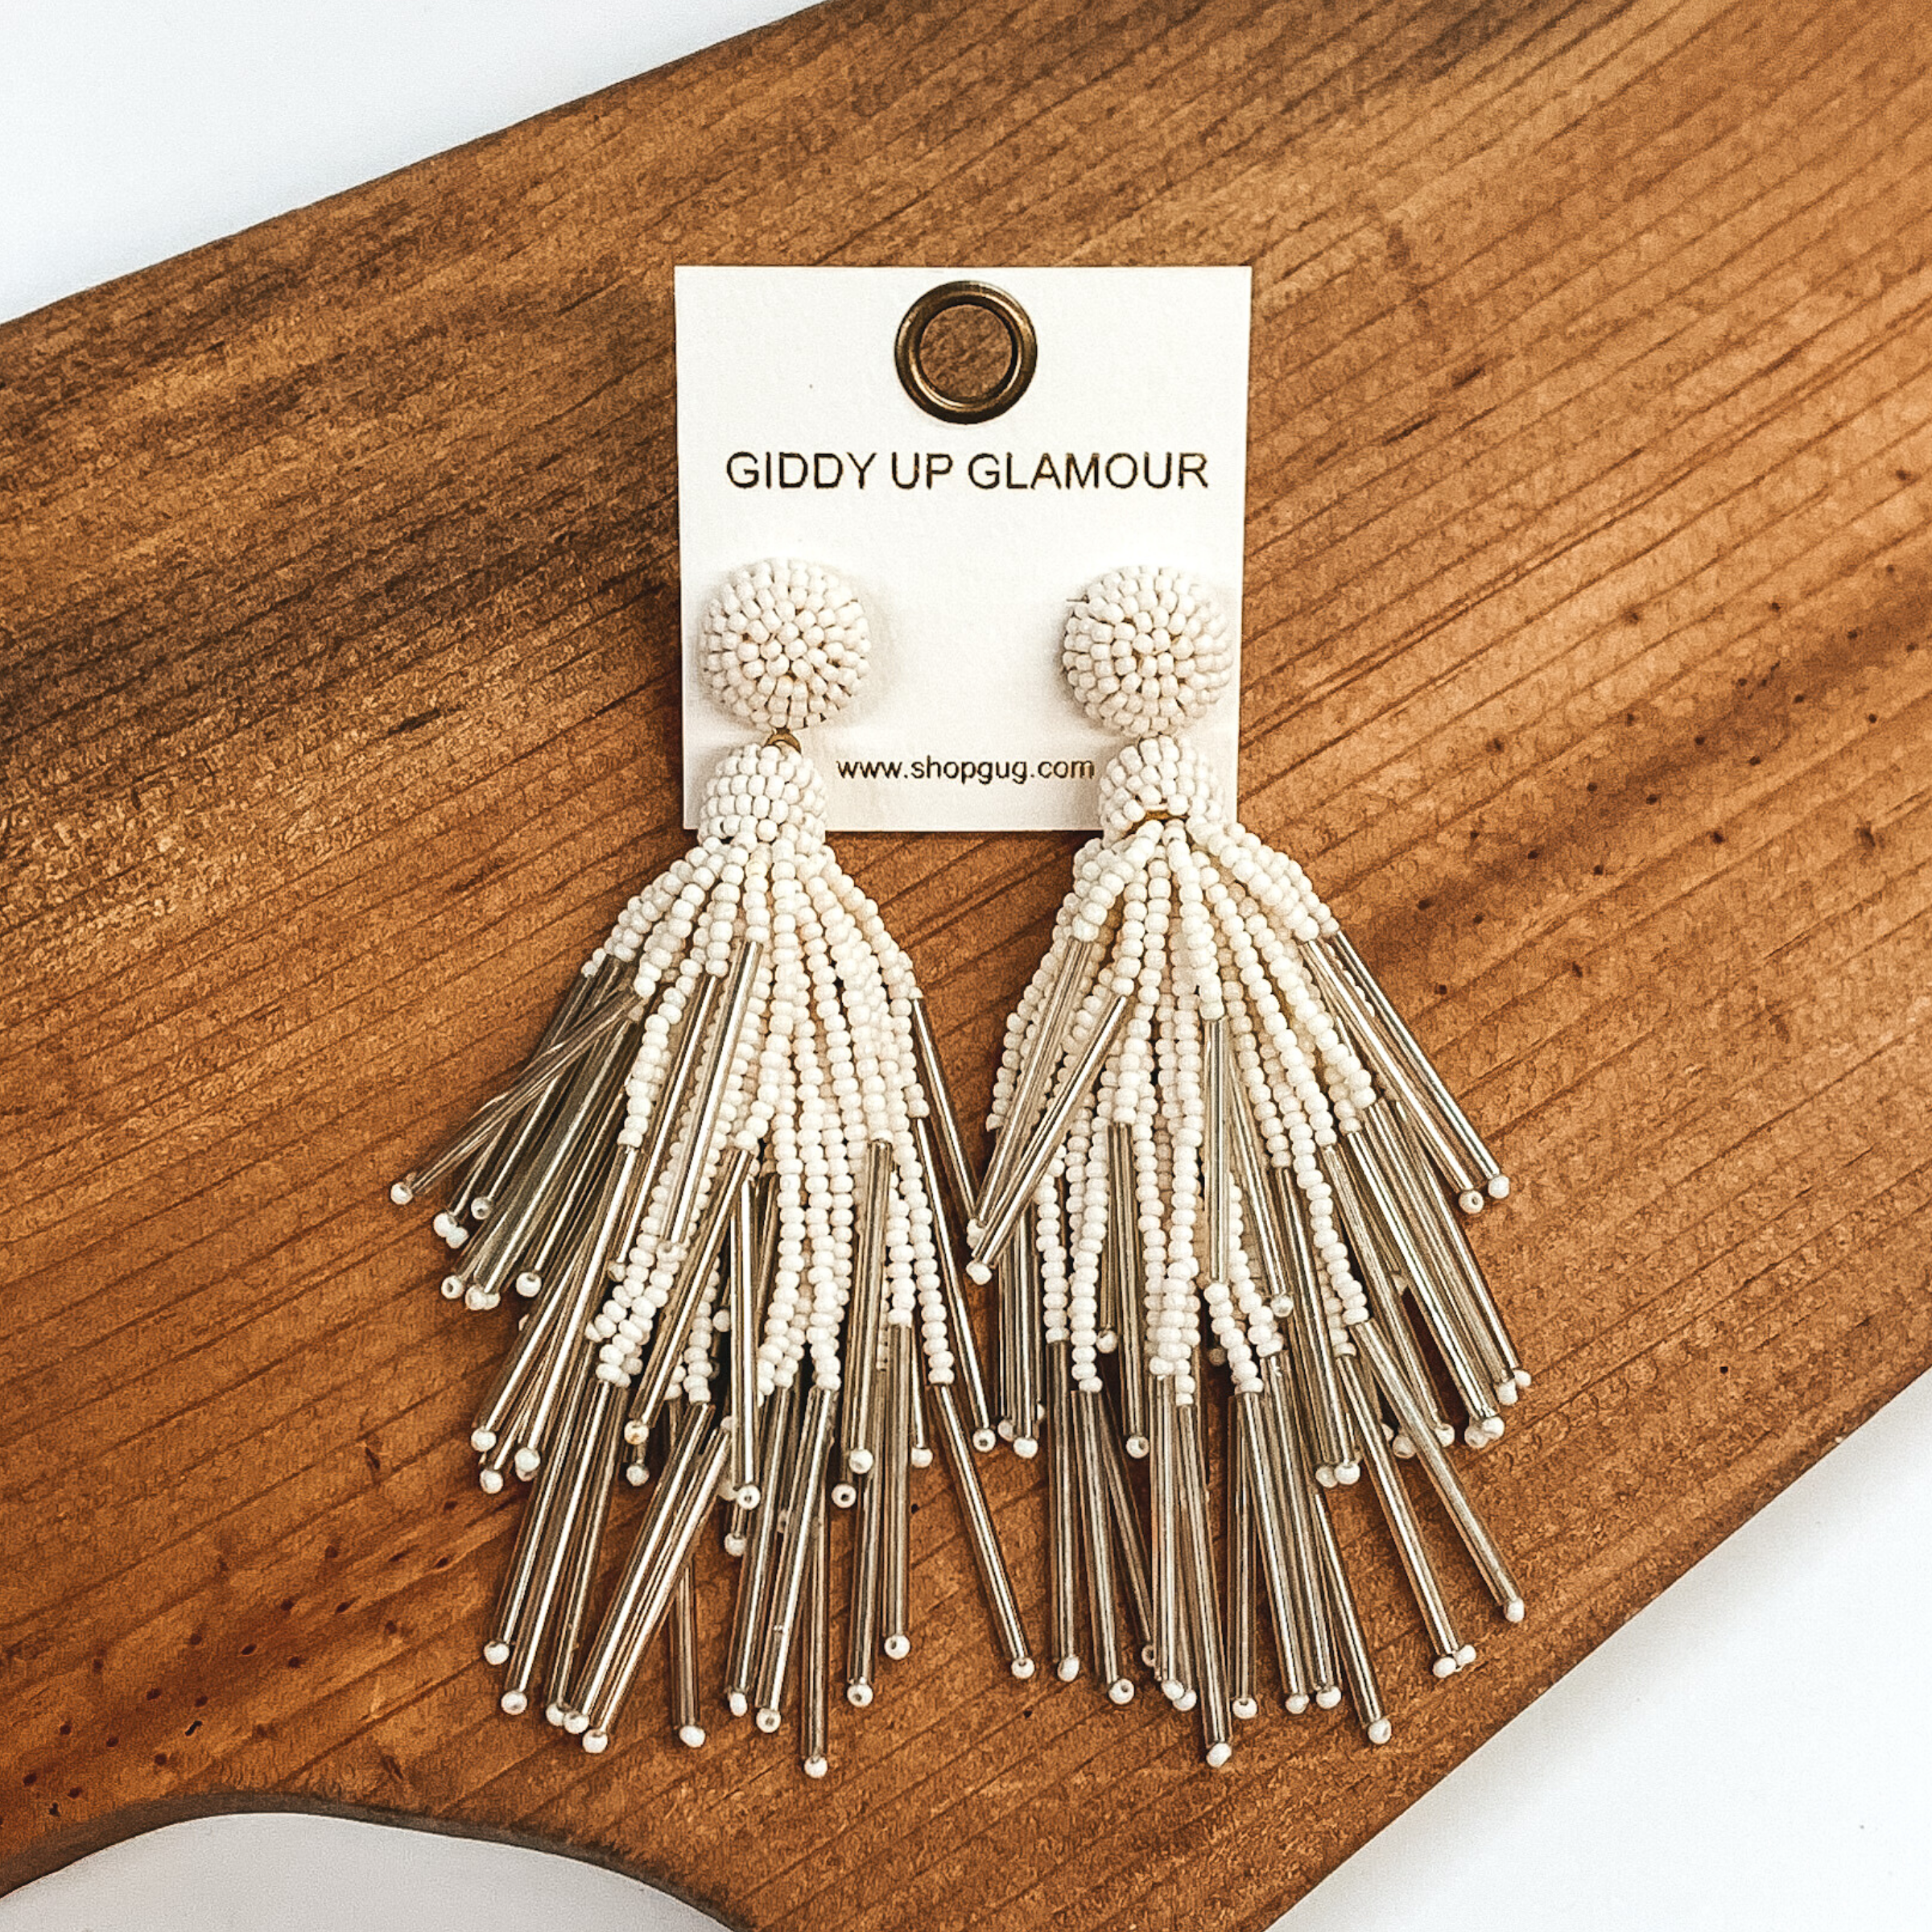 Circle beaded stud earrings with a beaded tassel in ivory. These earrings are pictured laying on a brown piece of wood on a white background.